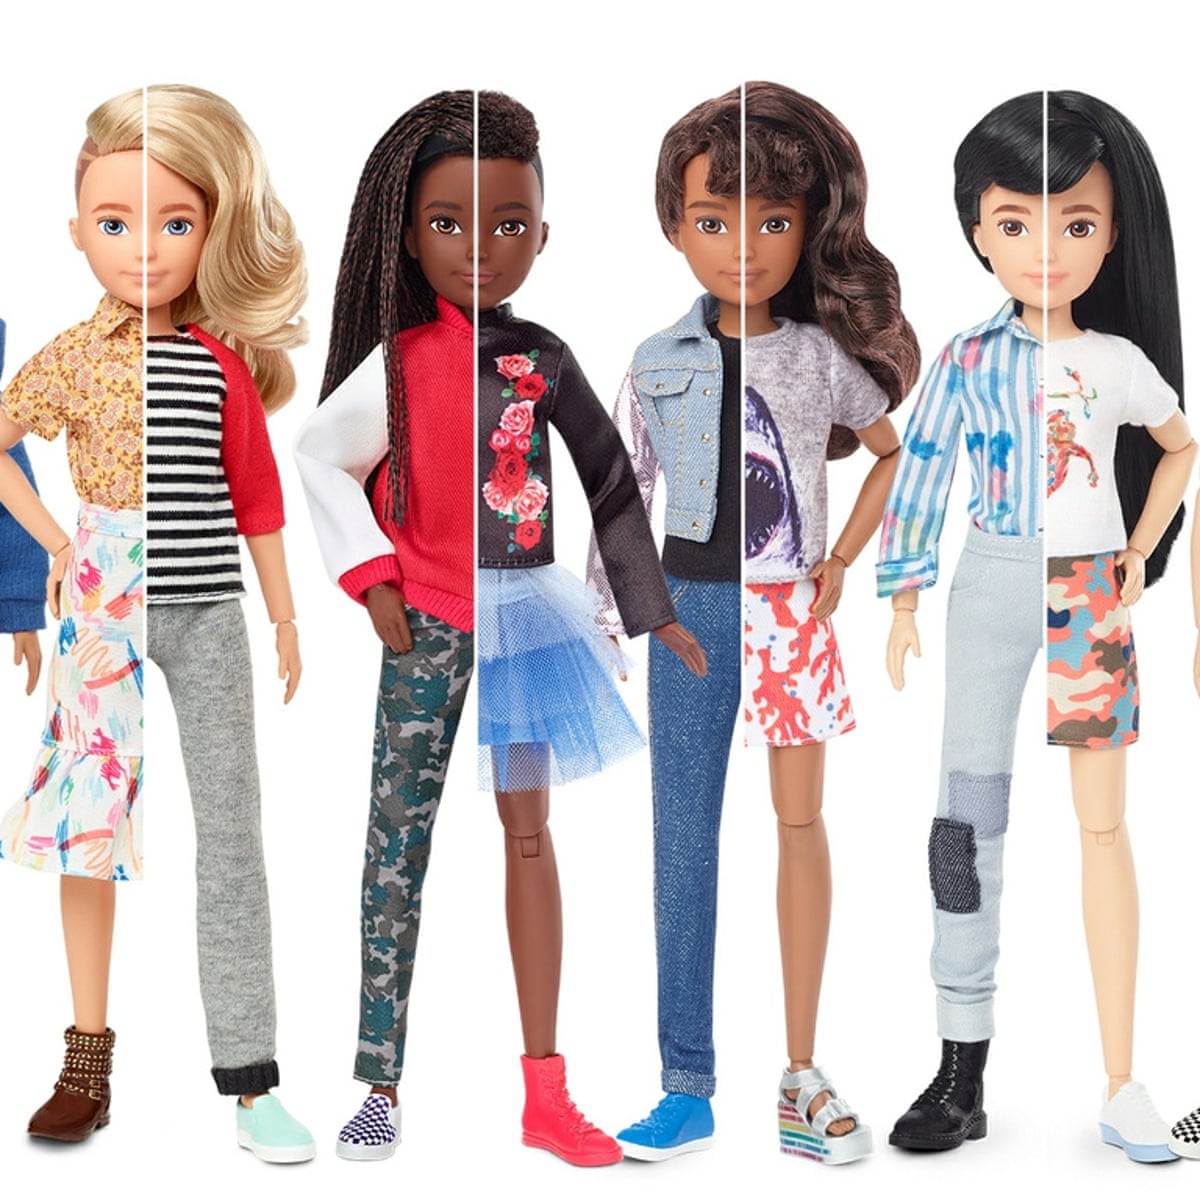 It was time': maker of Barbie launches line of gender-neutral | The Guardian